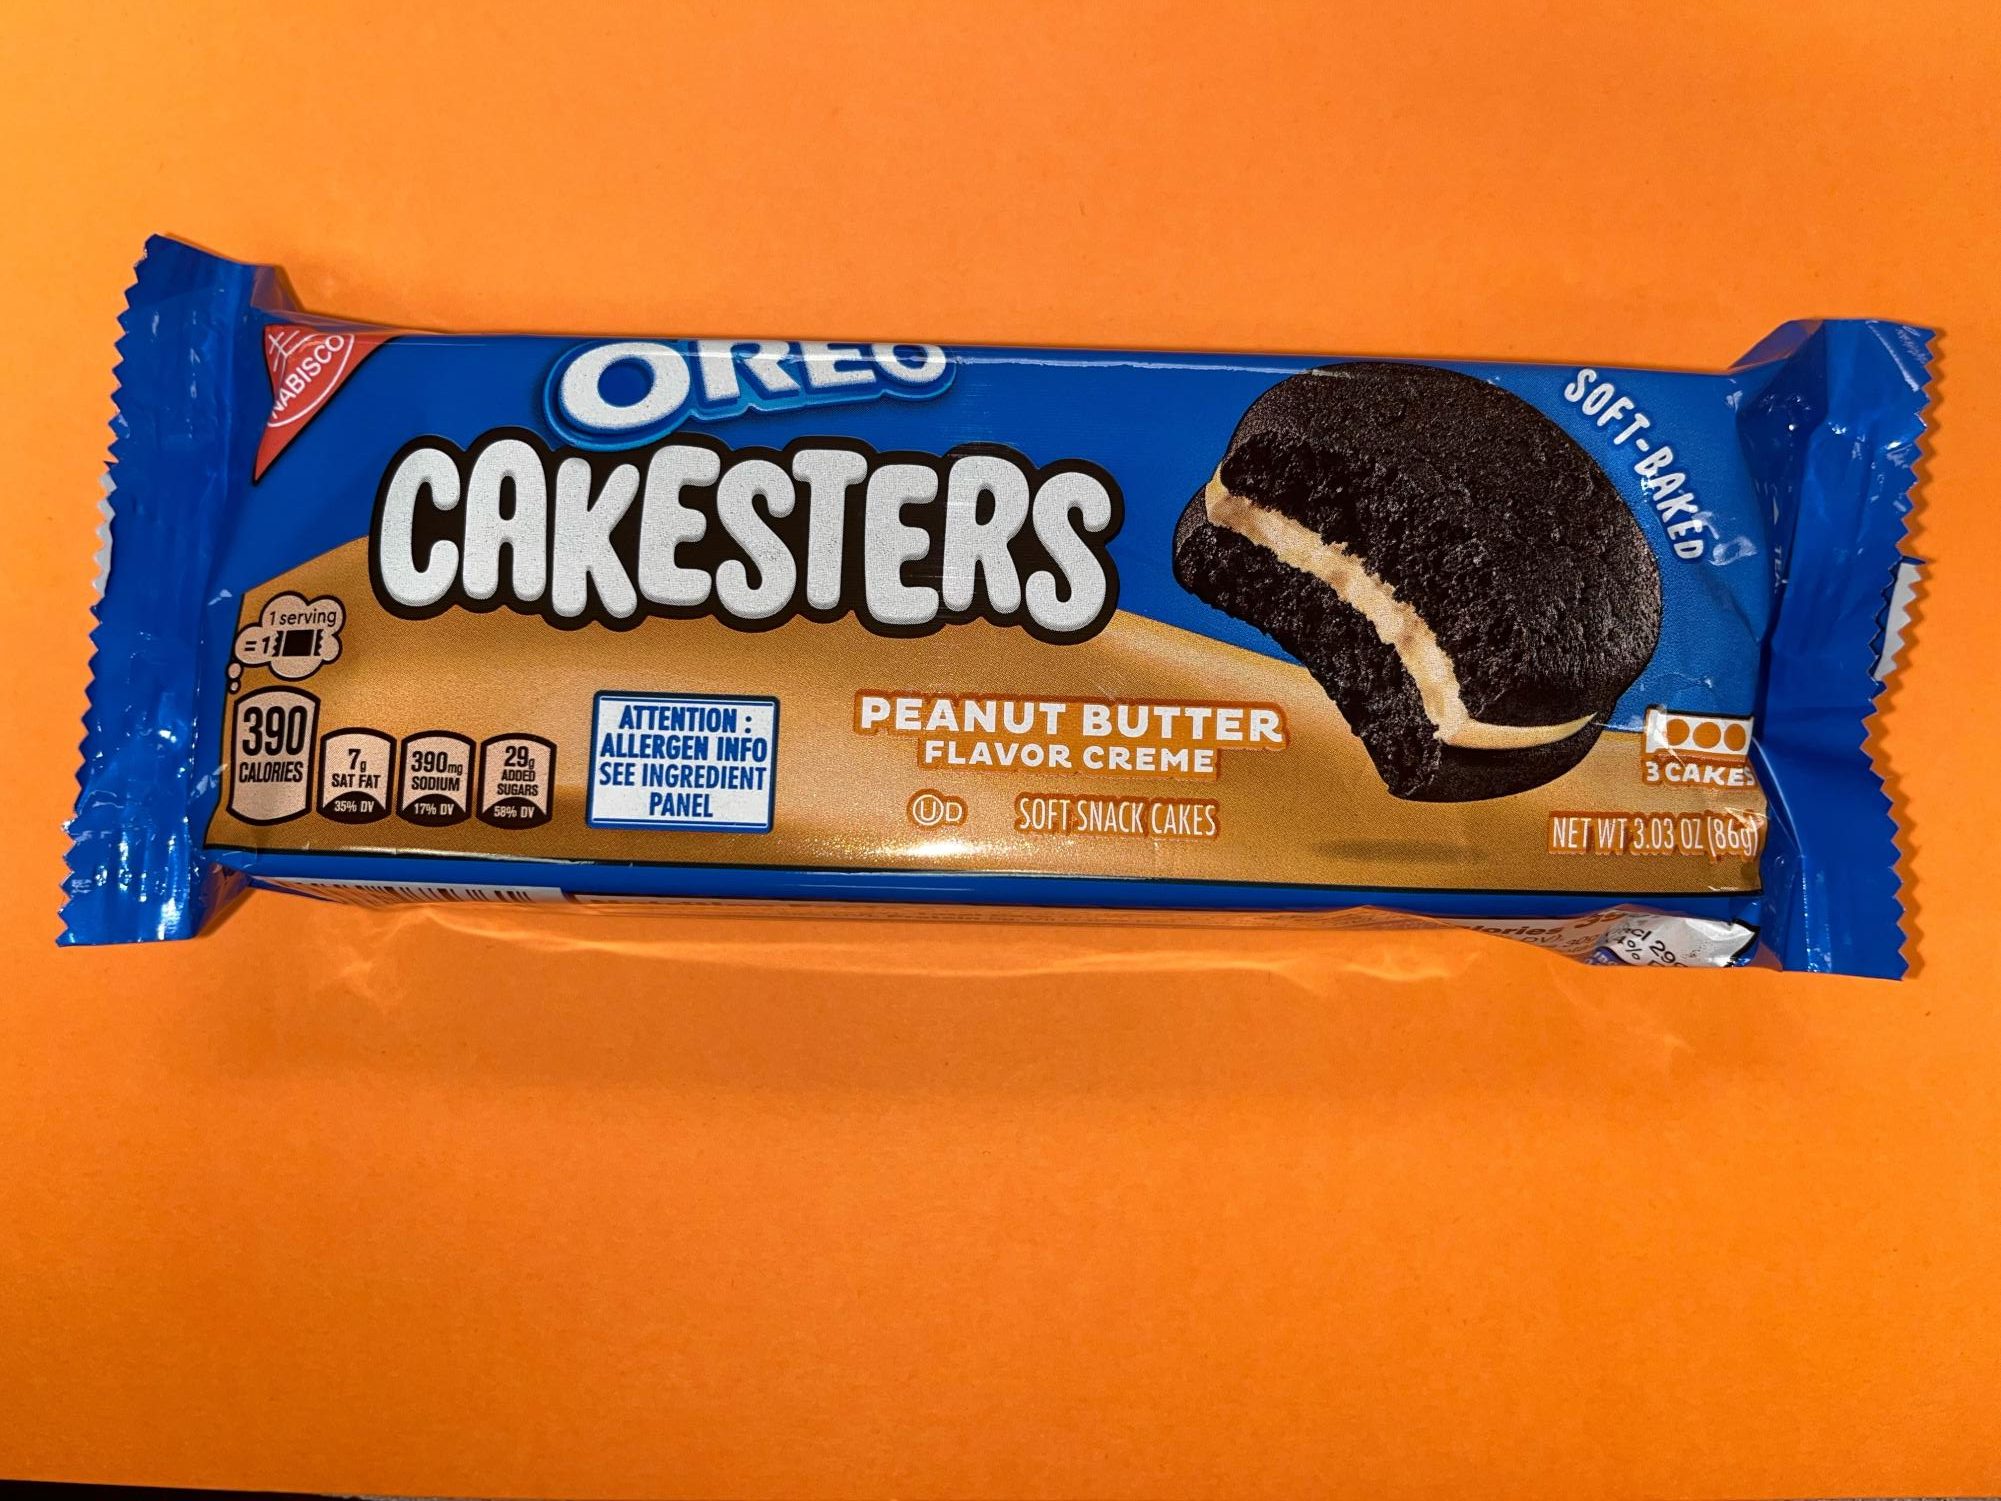 The Oreo Cakester is a puffed up, cake-like version of the original Oreo plus peanut butter. 